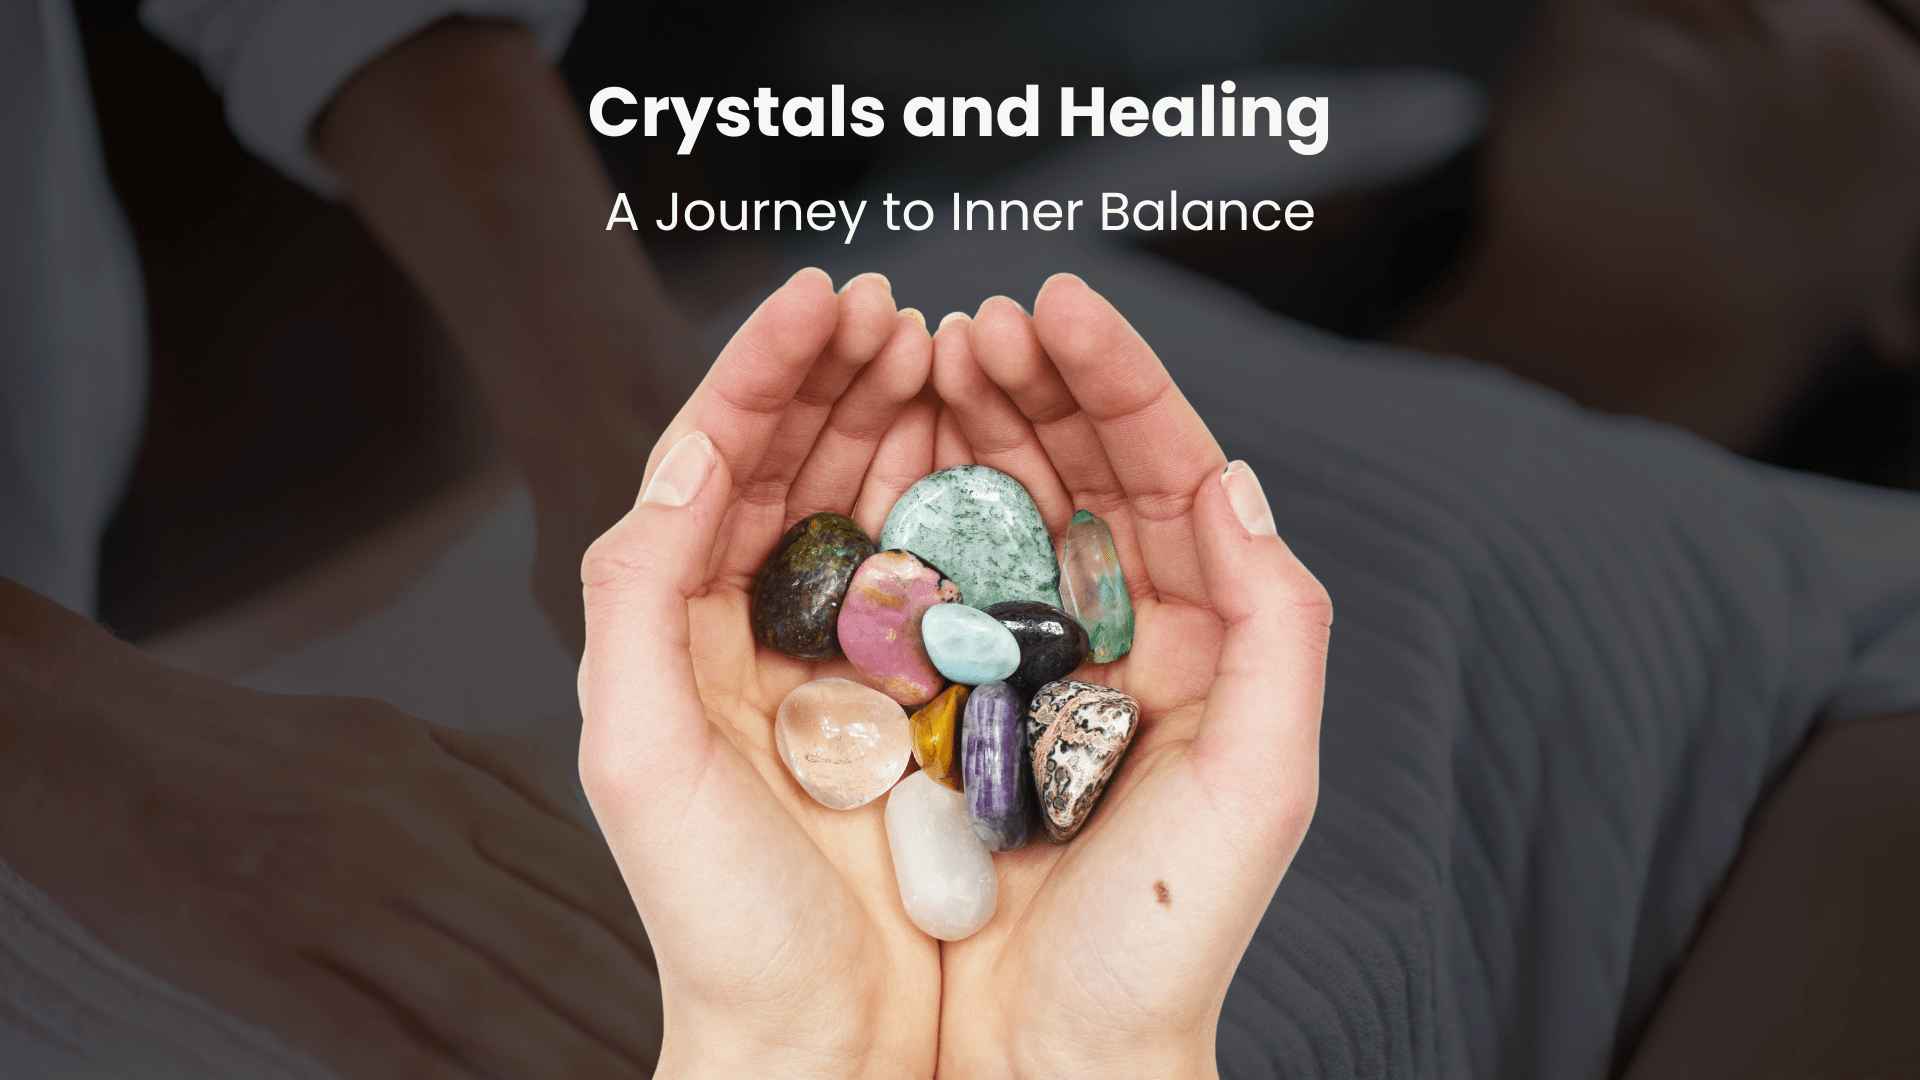 A JOURNEY TO INNER BALANCE